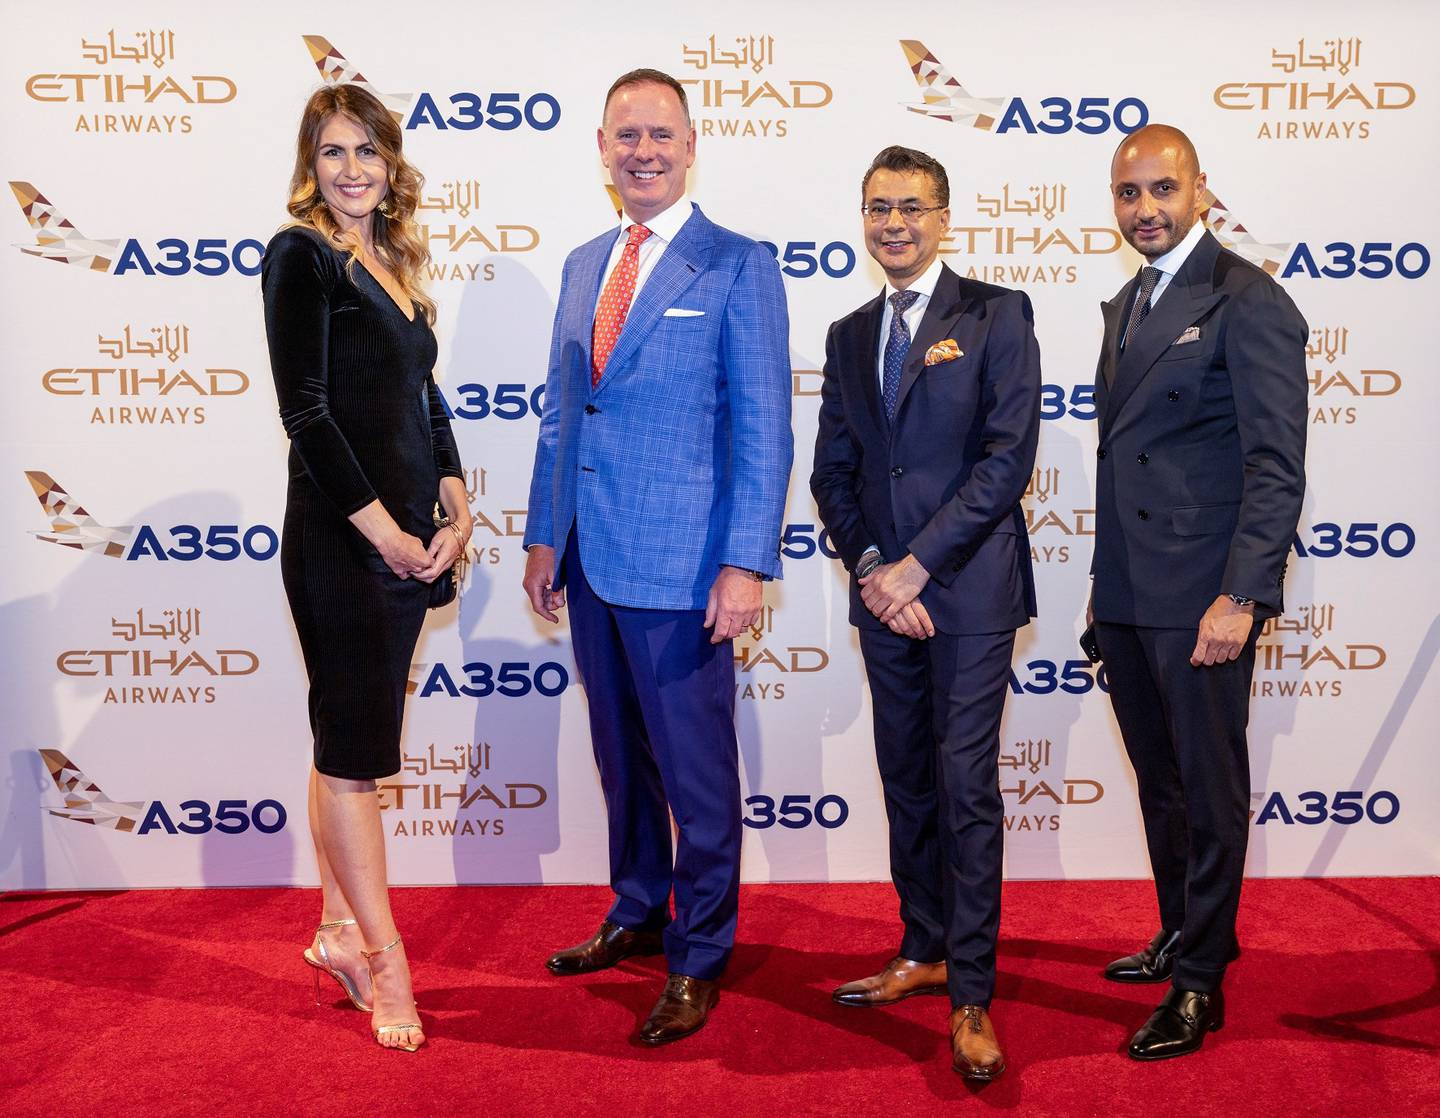 Etihad Airways officials Kim Hardaker, vice president of loyalty and partnerships, and Tony Douglas, group chief executive, with Marriot International's chief operating officer Sandeep Walia and general manager Moustafa Sakr during the airline's event in New York. Photo: Etihad